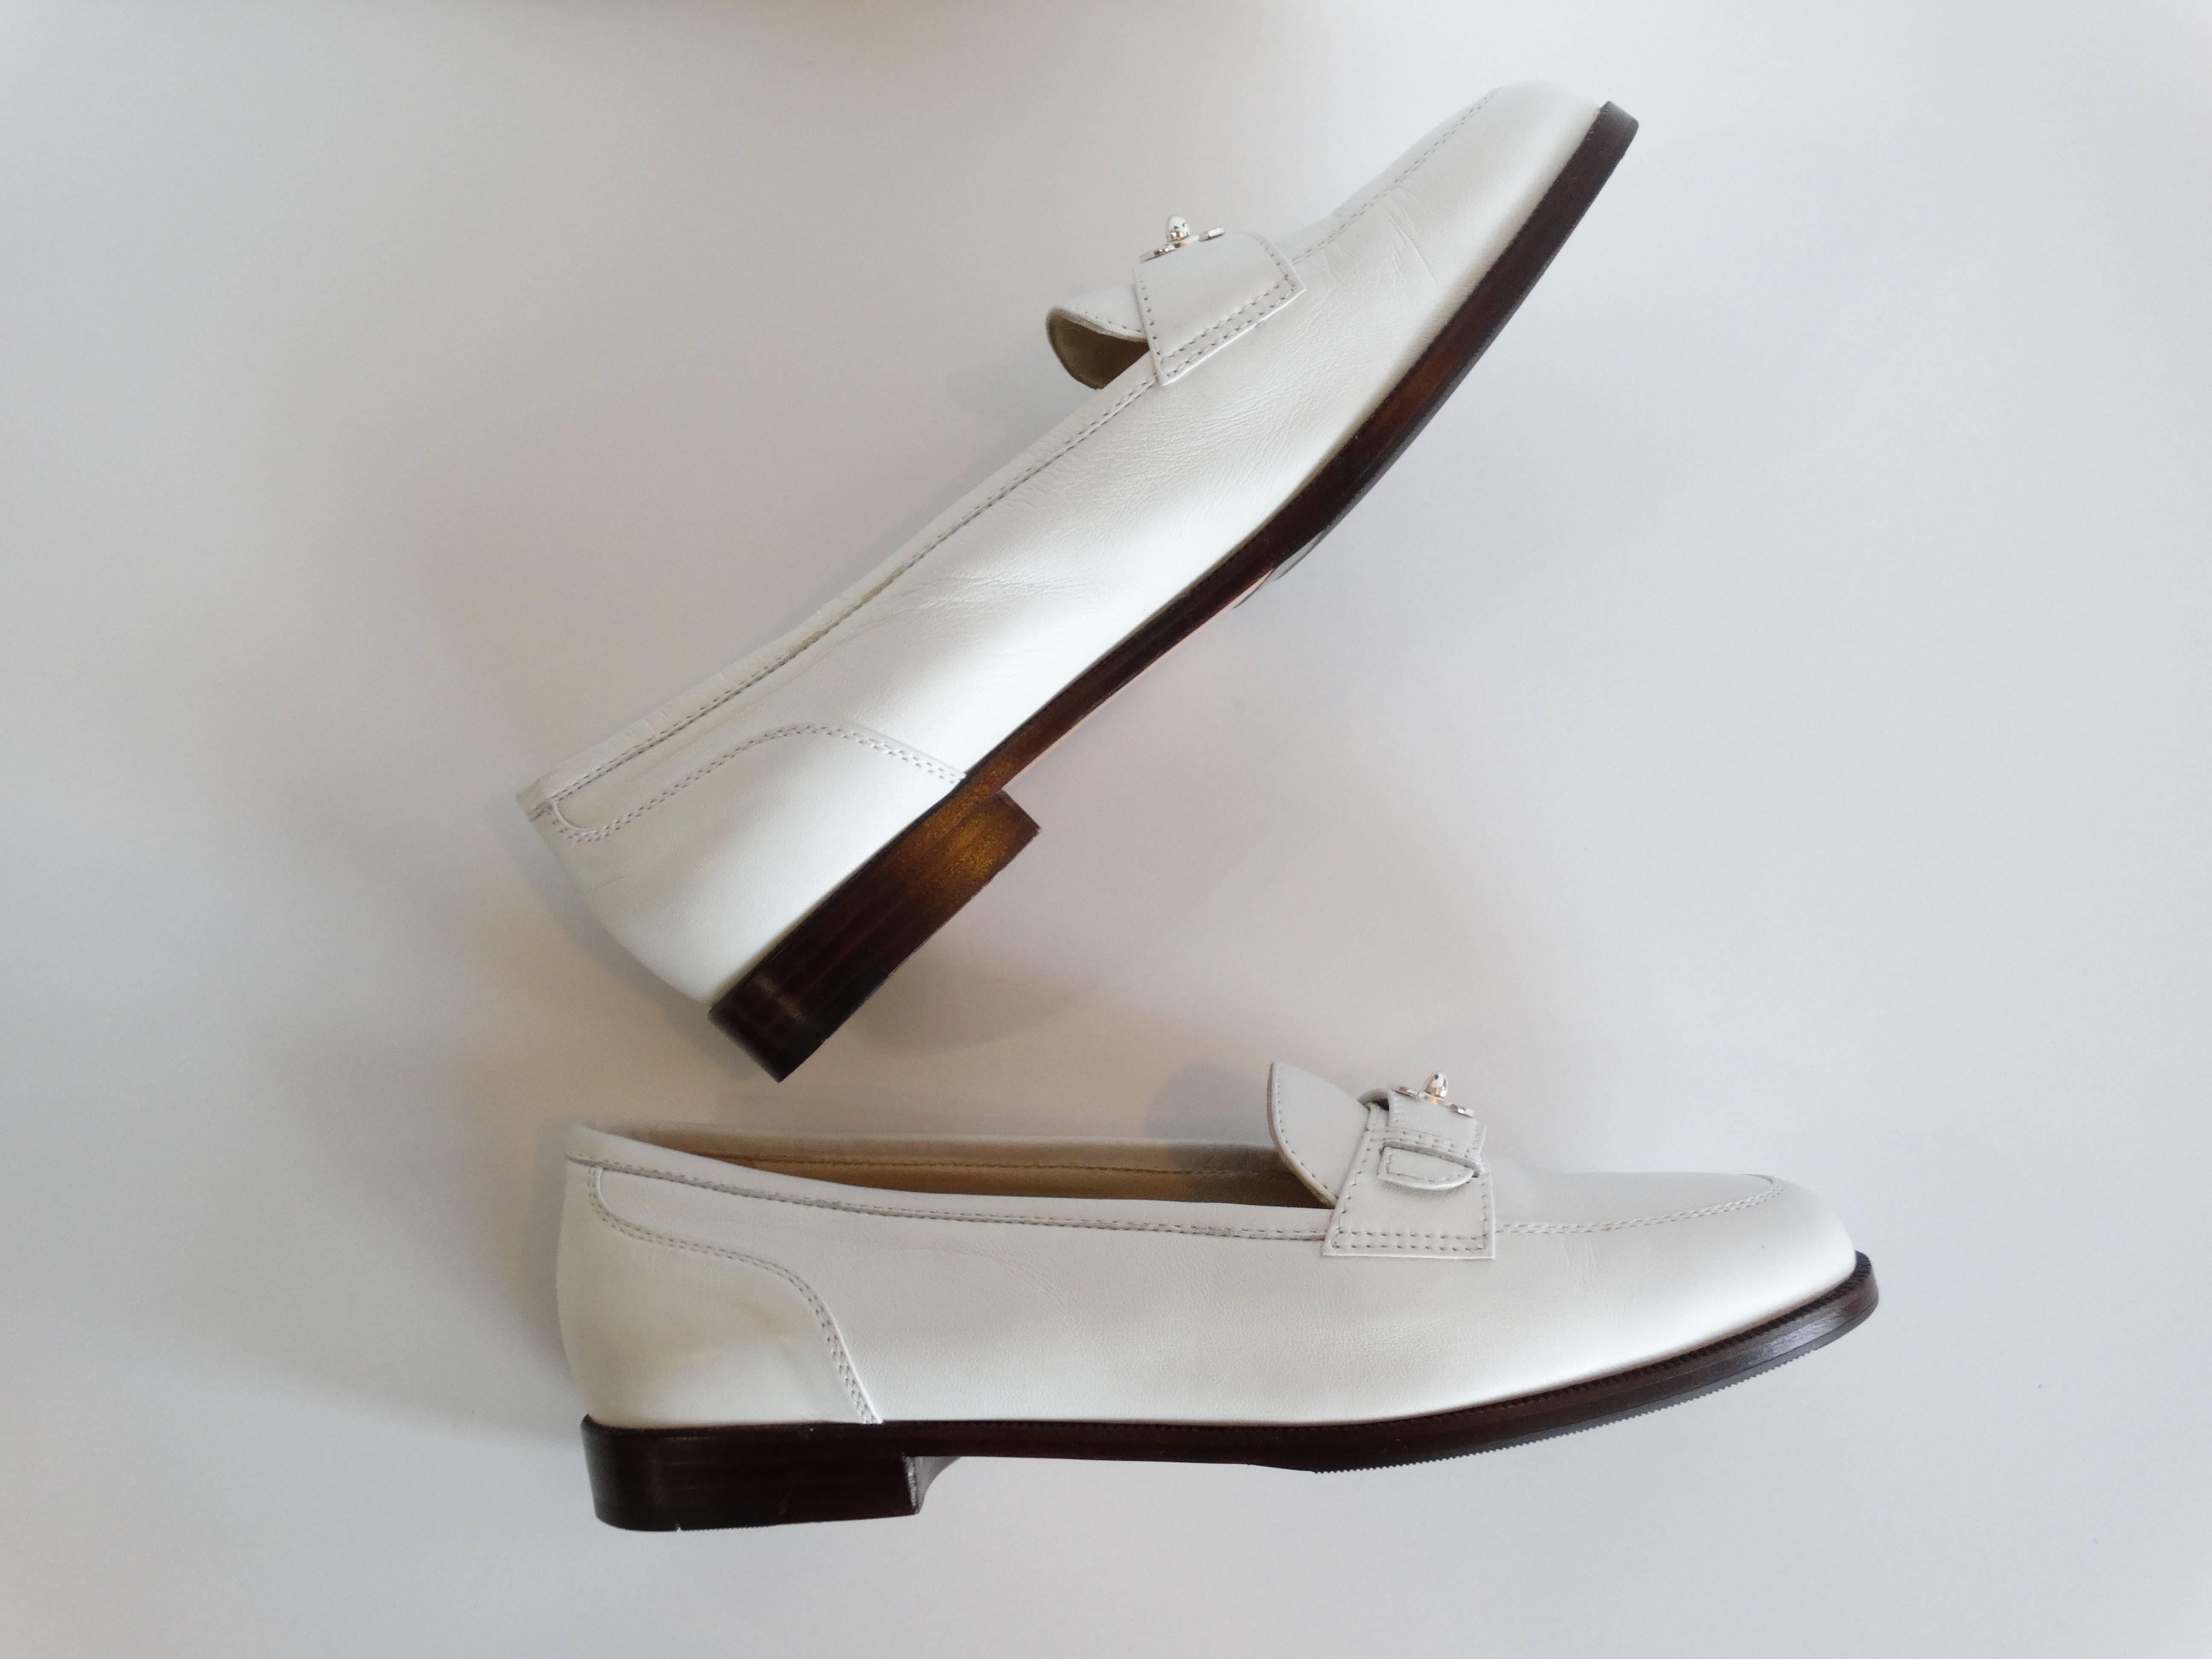 A fabulous pair of 1996P Chanel bianco calfskin leather loafers with interlocking CC's in Silver. Unworn marked a size 37 1/2 fits a todays 61/2 or 7. A great pair of shoes to pair with dresses or your favorite denim. Comes with original box 

Style